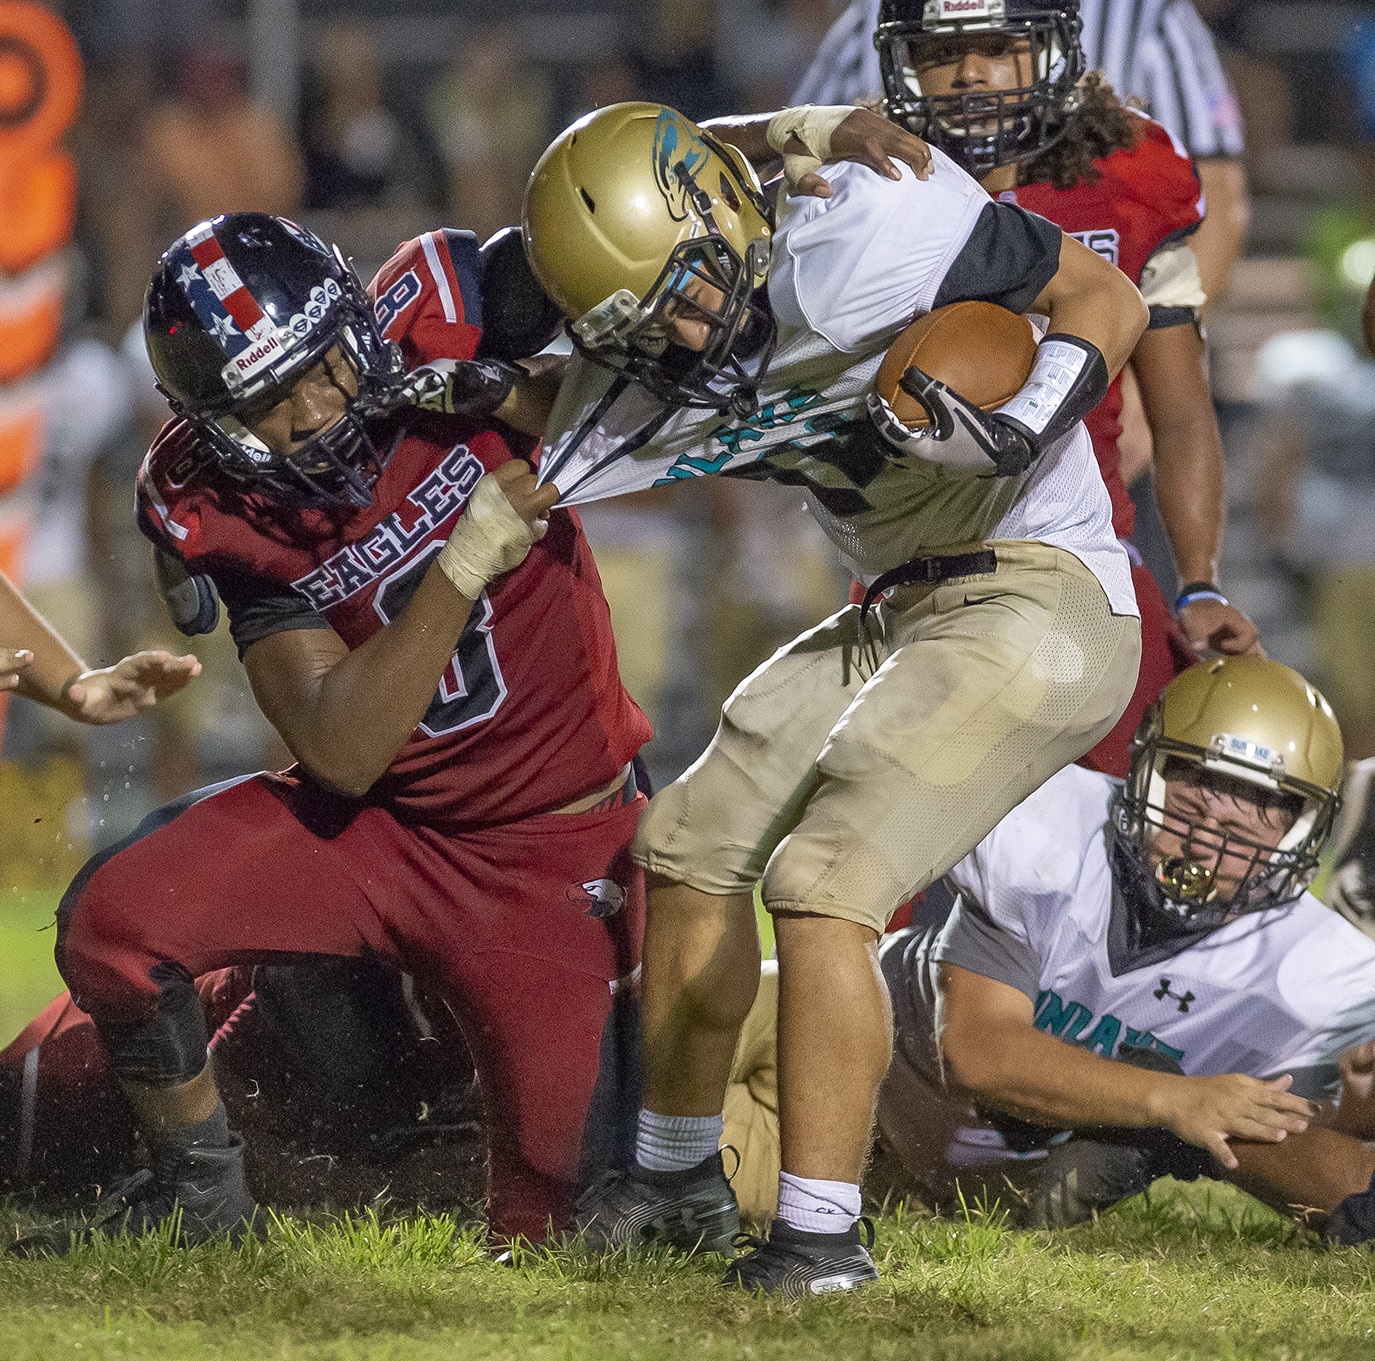 Springstead High’s ,8, Nicholas Billingsly corrals a Sunlake ball carrier in the Eagles home opener.  Photo by JOE DiCRISTOFALO